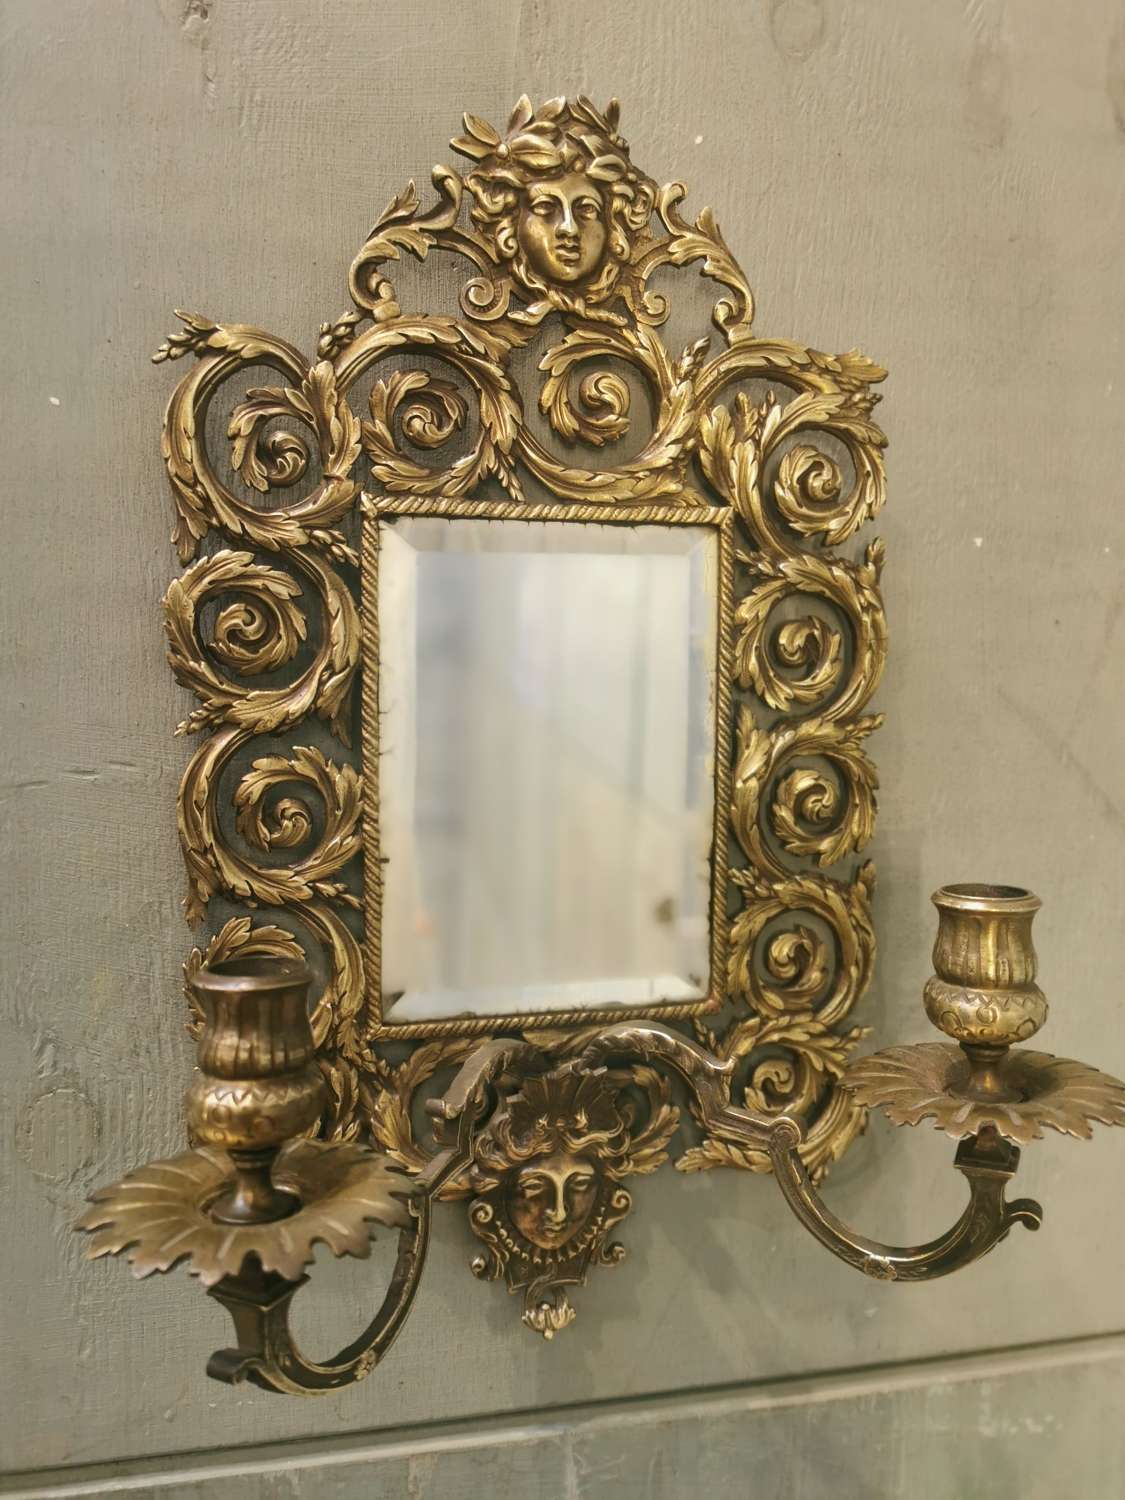 A Good Bradley and hubbard Mirror with Sconces C.1900